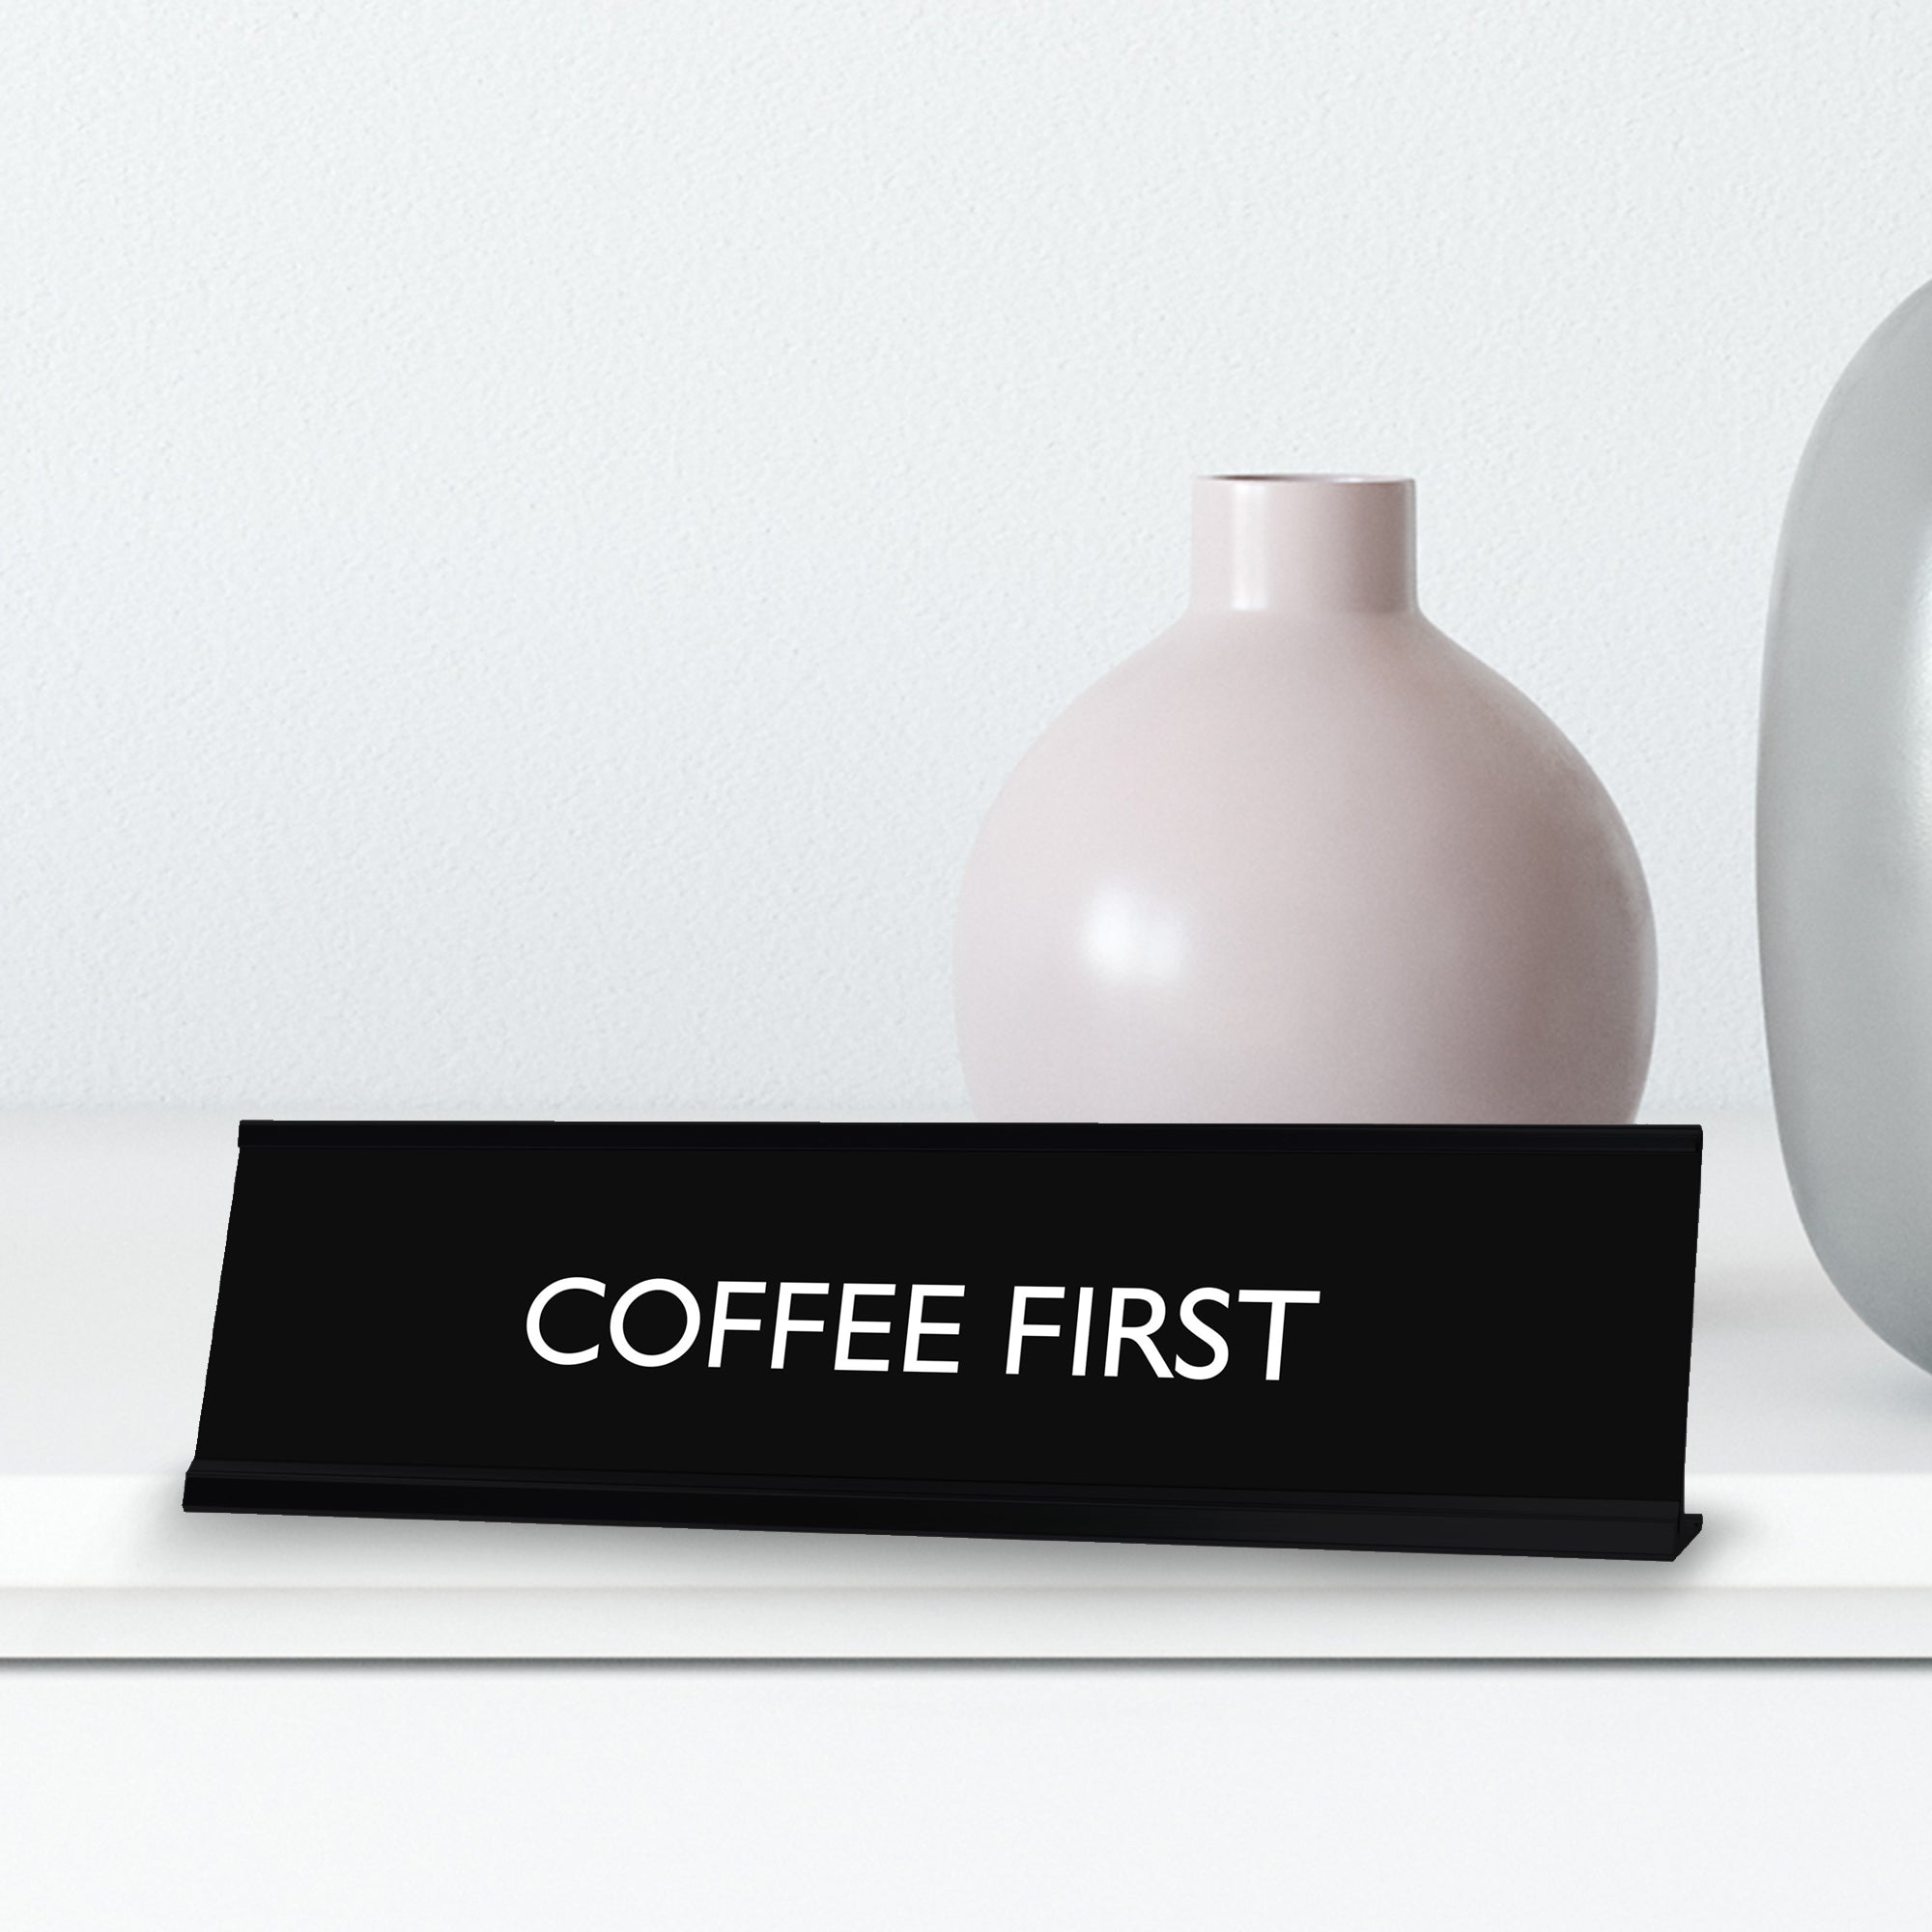 COFFEE FIRST Novelty Desk Sign